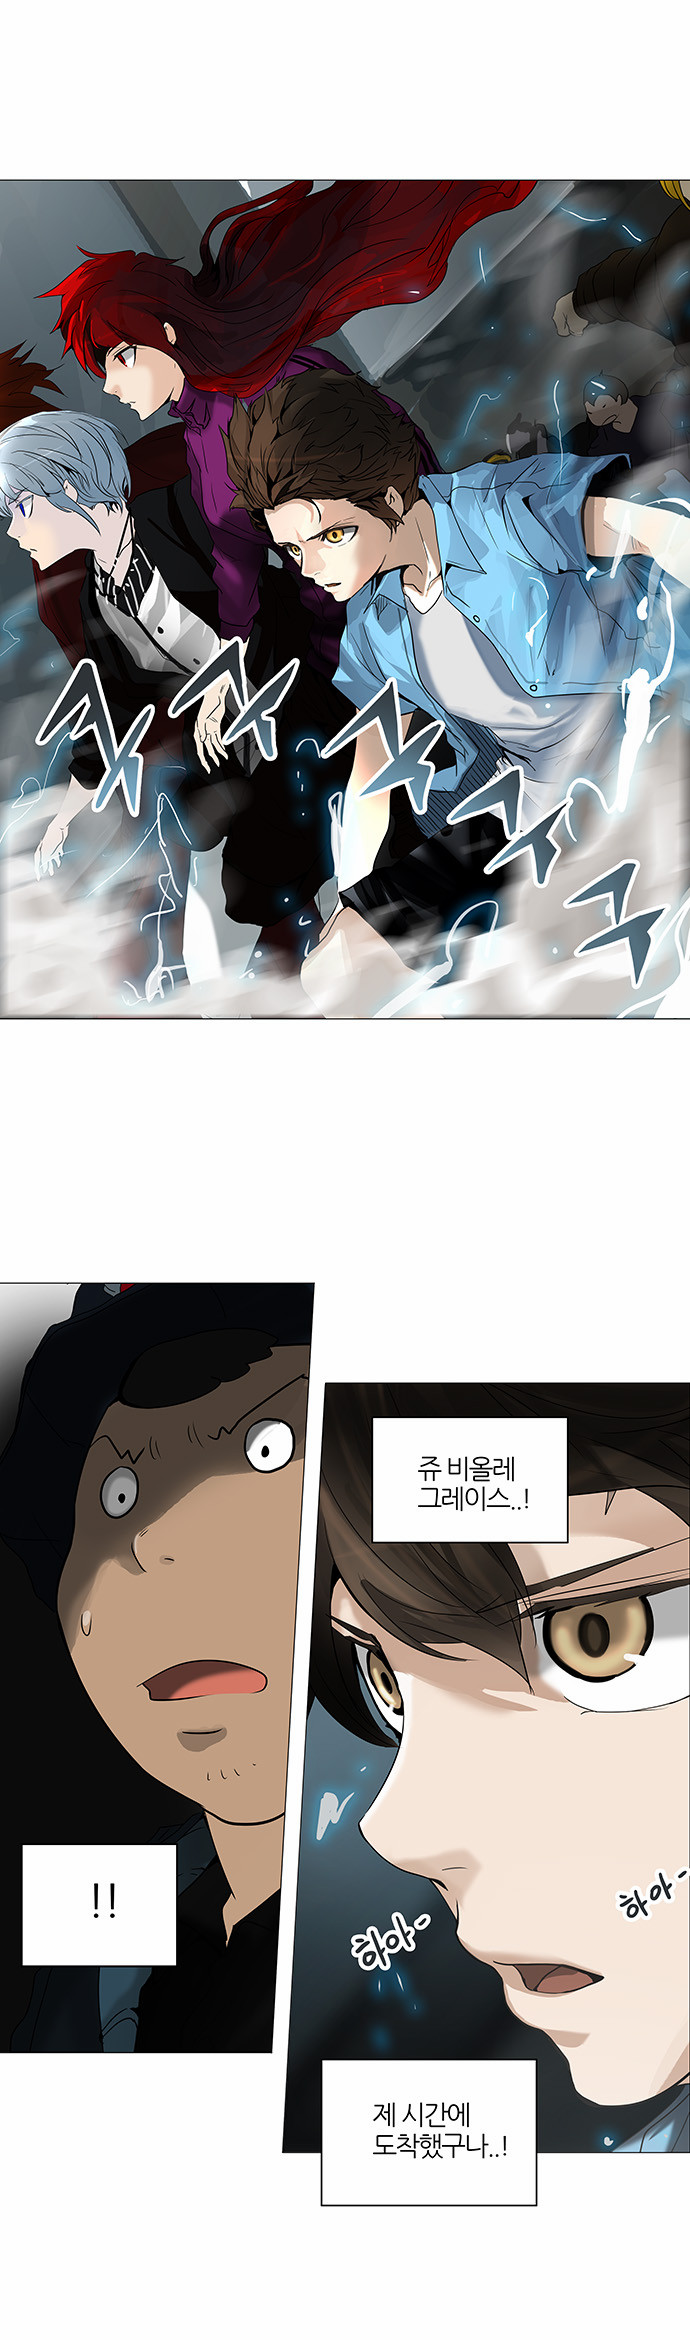 Tower of God - Chapter 254 - Page 1